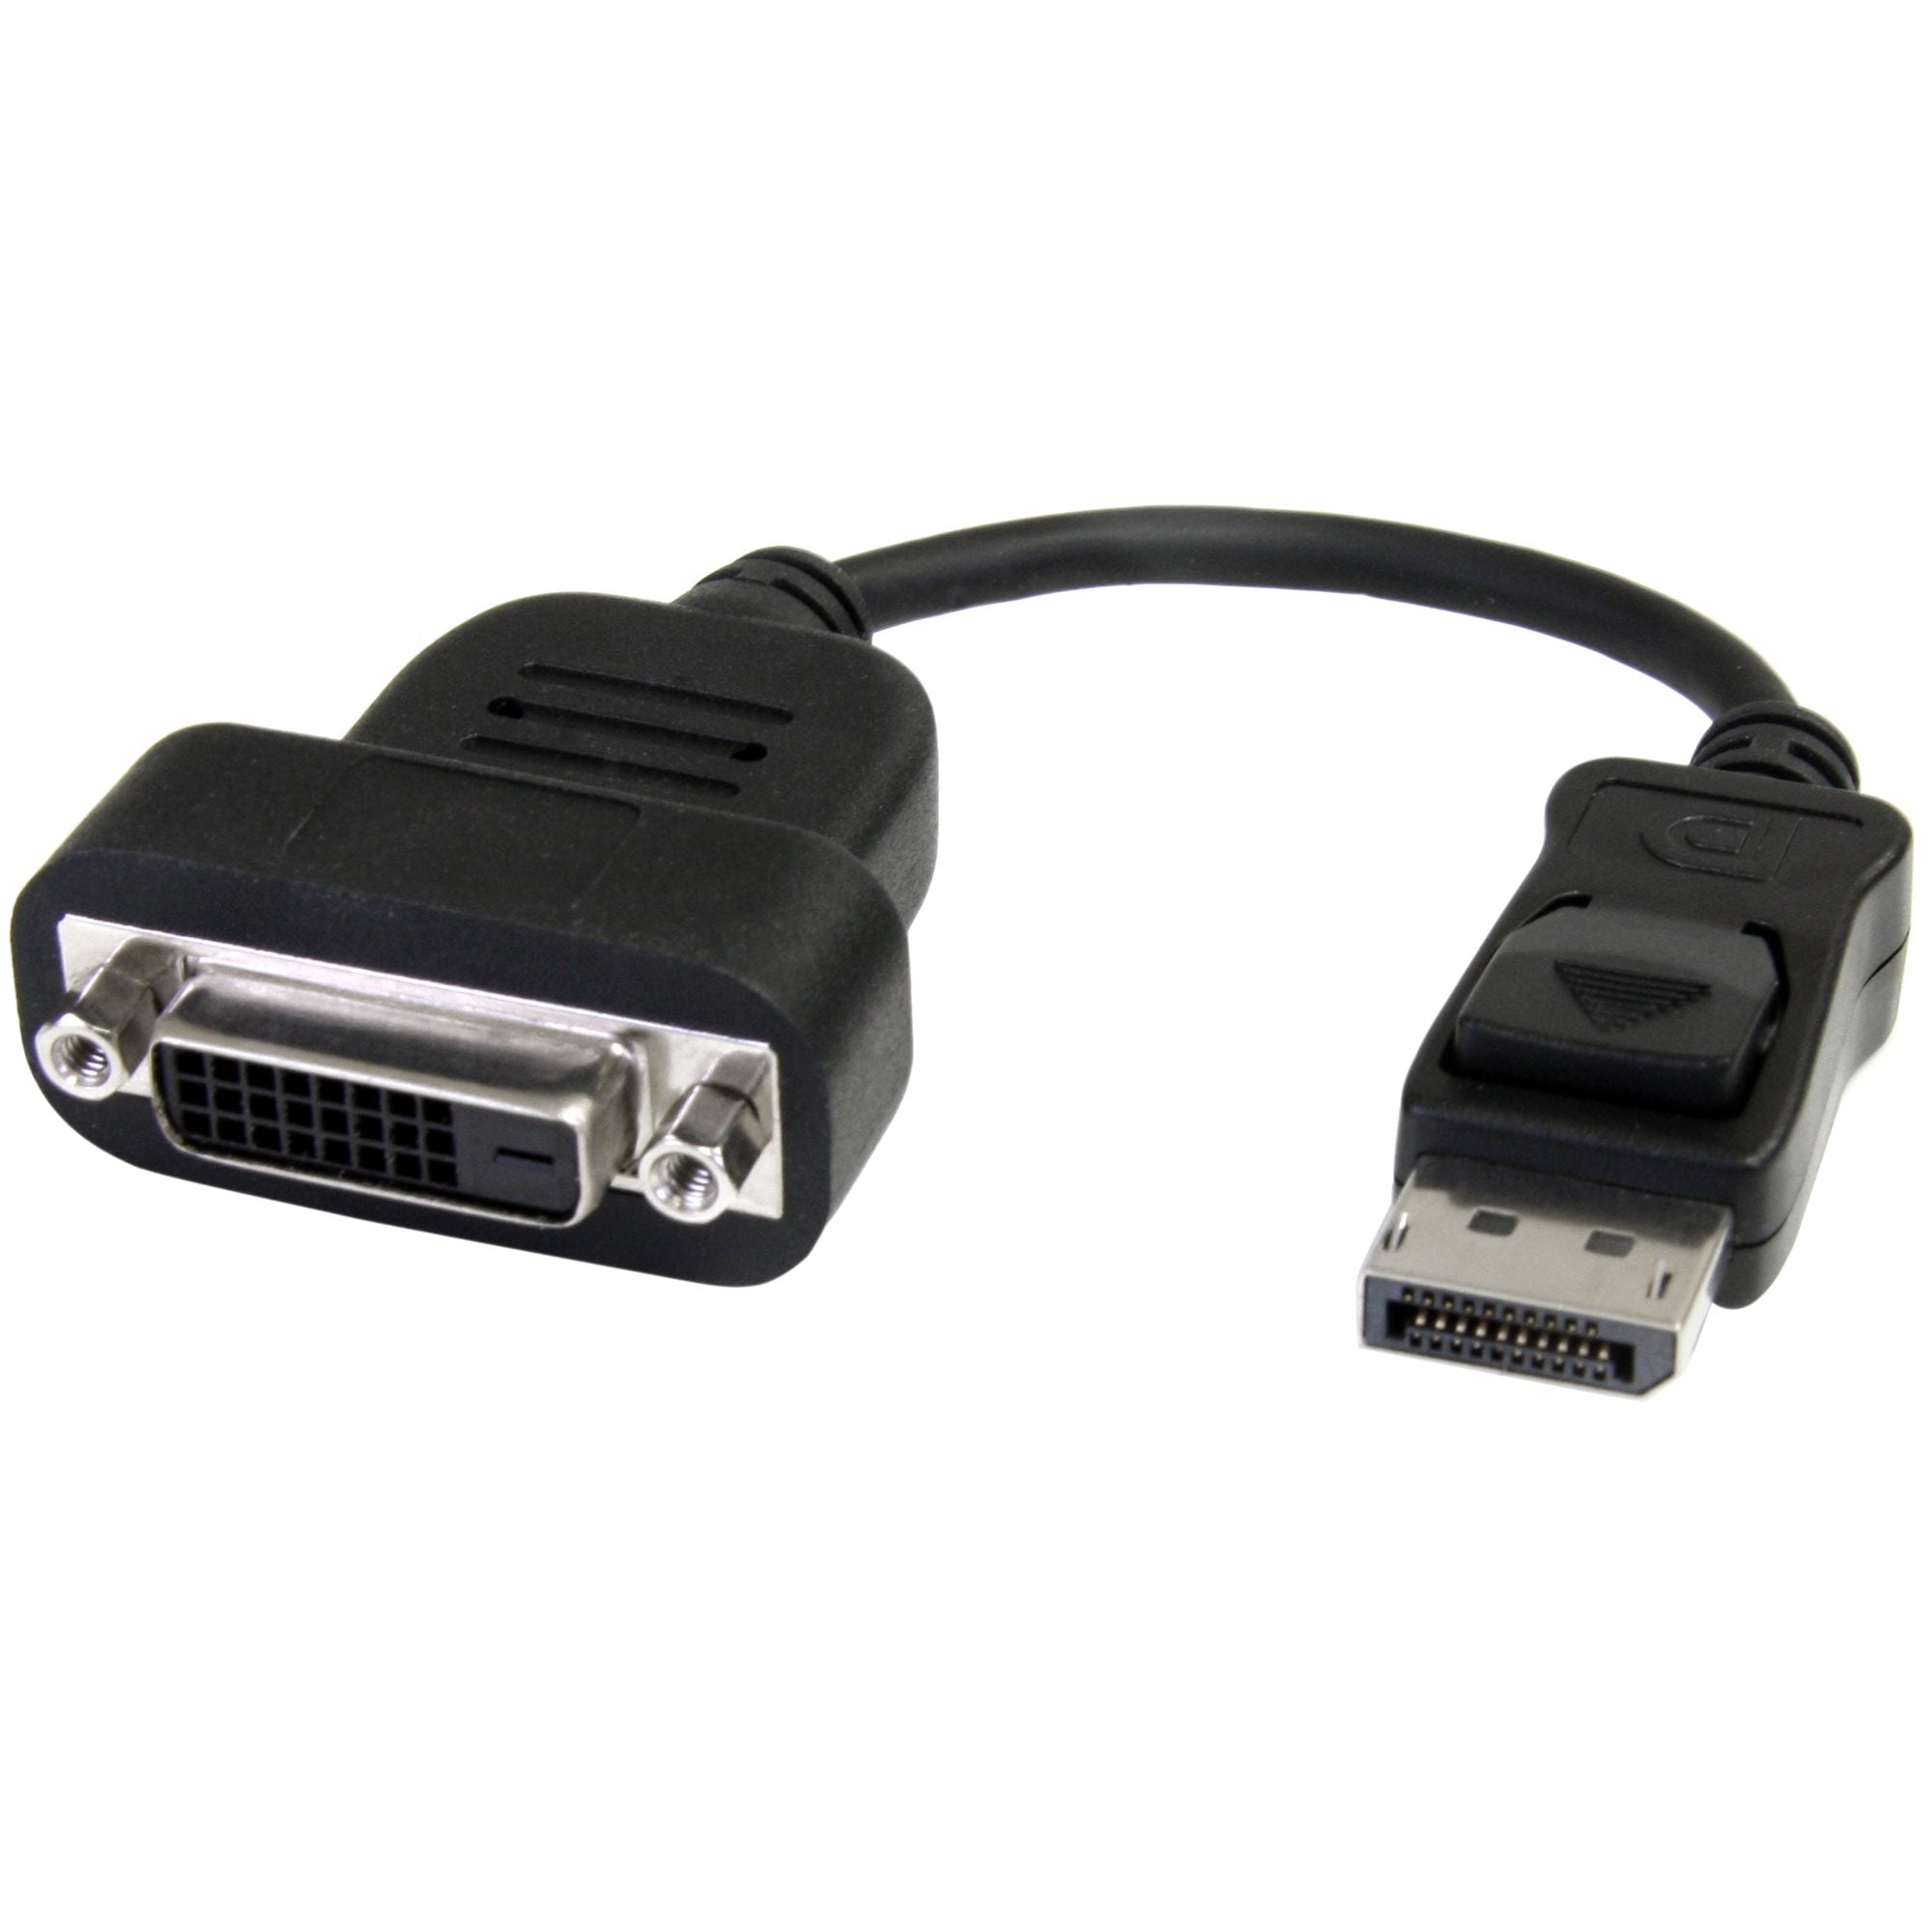 StarTech.com DisplayPort to DVI Adapter - Active DisplayPort to DVI-D Adapter/Video Converter 1080p - DP 1.2 to DVI Monitor Cable Adapter Dongle - DP to DVI Adapter - Latching DP Connector